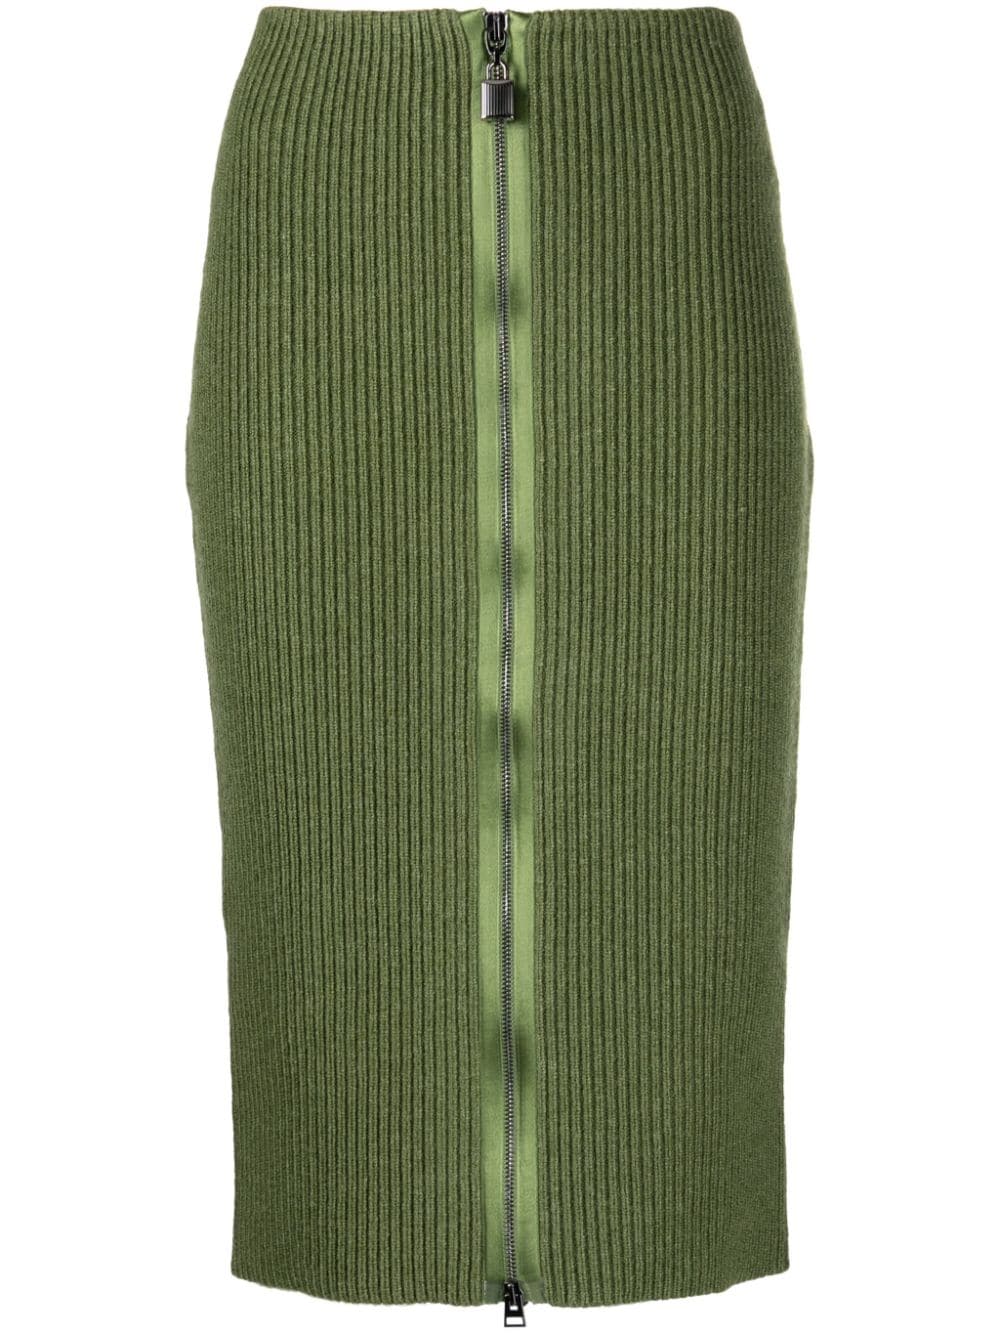 Tom Ford Ribbed Zip-up Pencil Skirt In Green